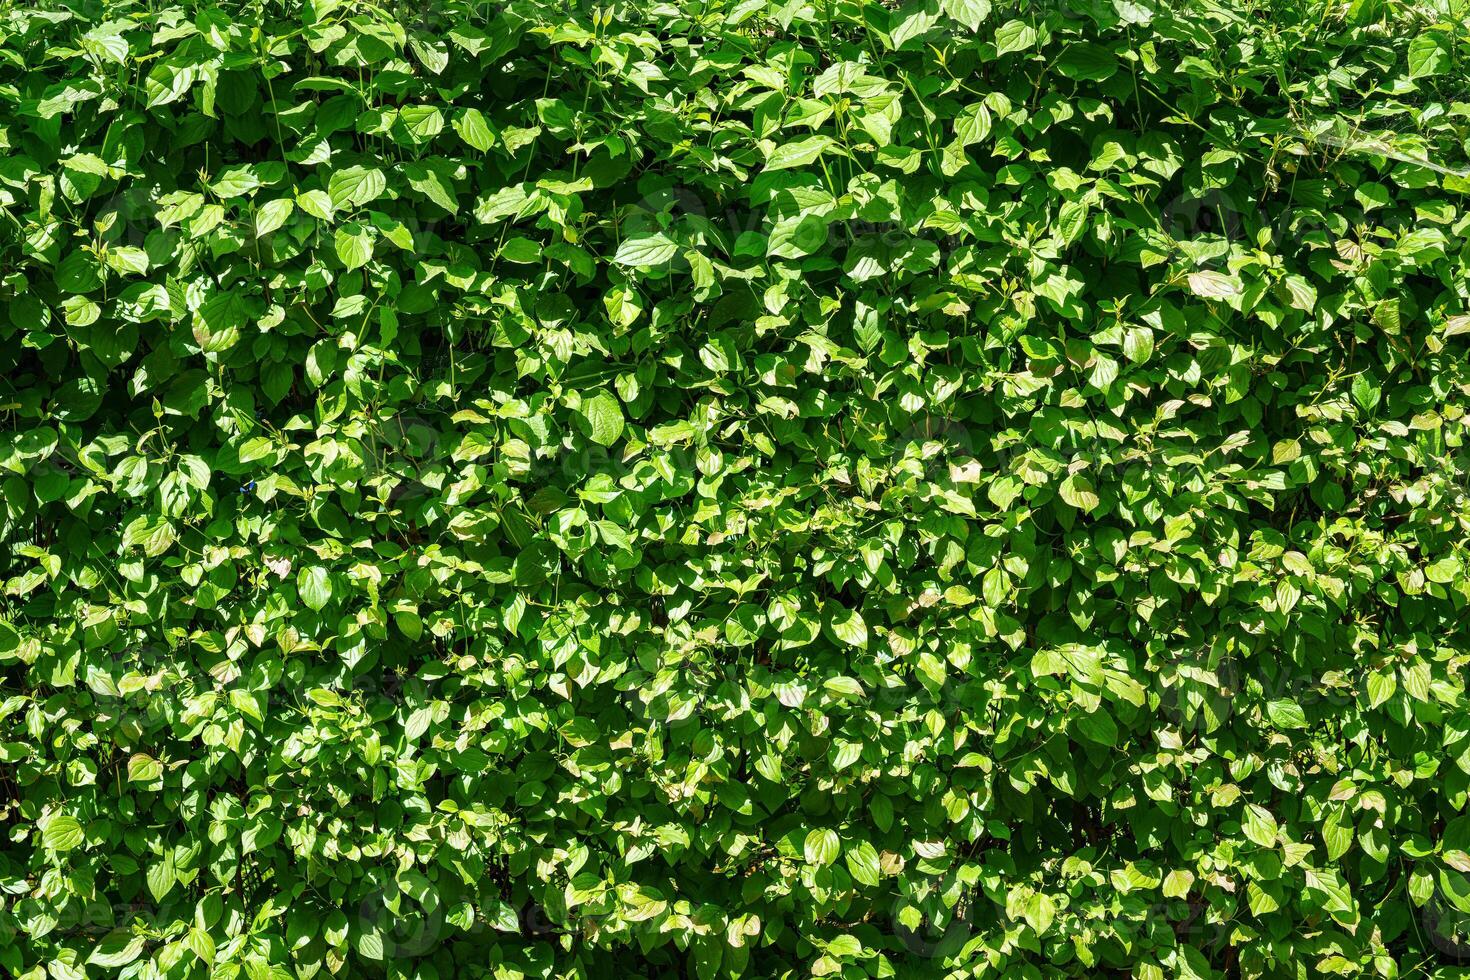 Decorative wall from a plant with green leaves. Natural pattern. Abstract background. Landscaping. photo